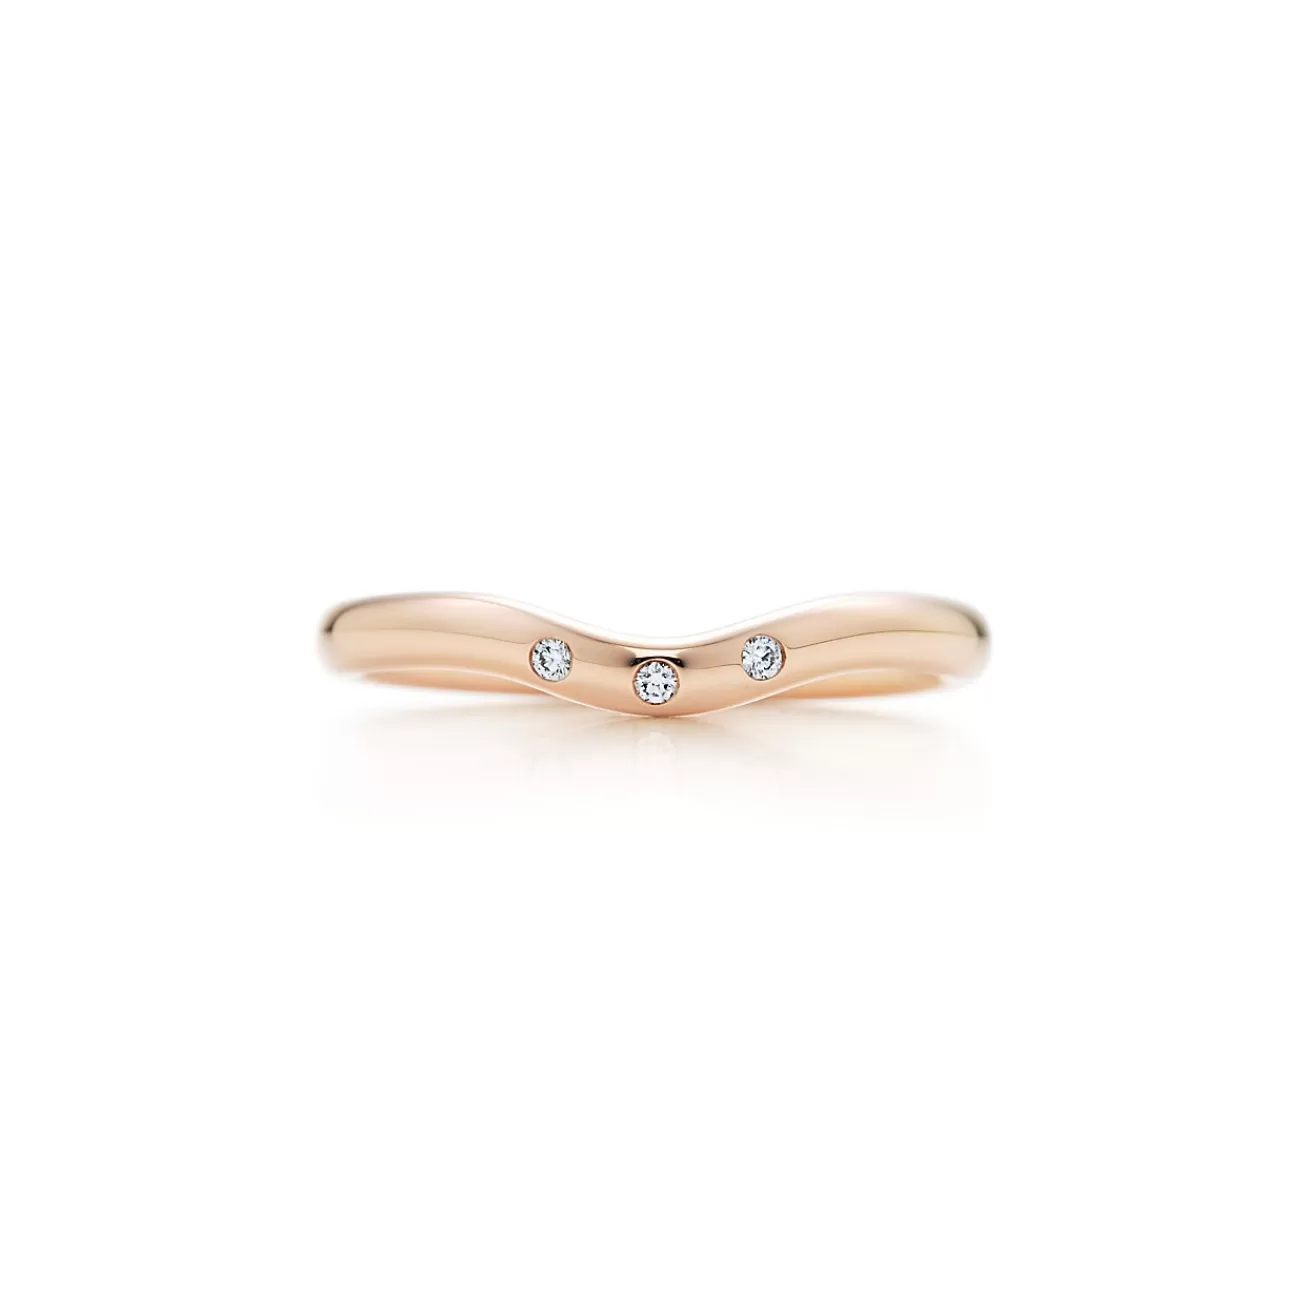 Tiffany & Co. Elsa Peretti® wedding band ring with diamonds in 18k rose gold. | ^ Rings | Rose Gold Jewelry